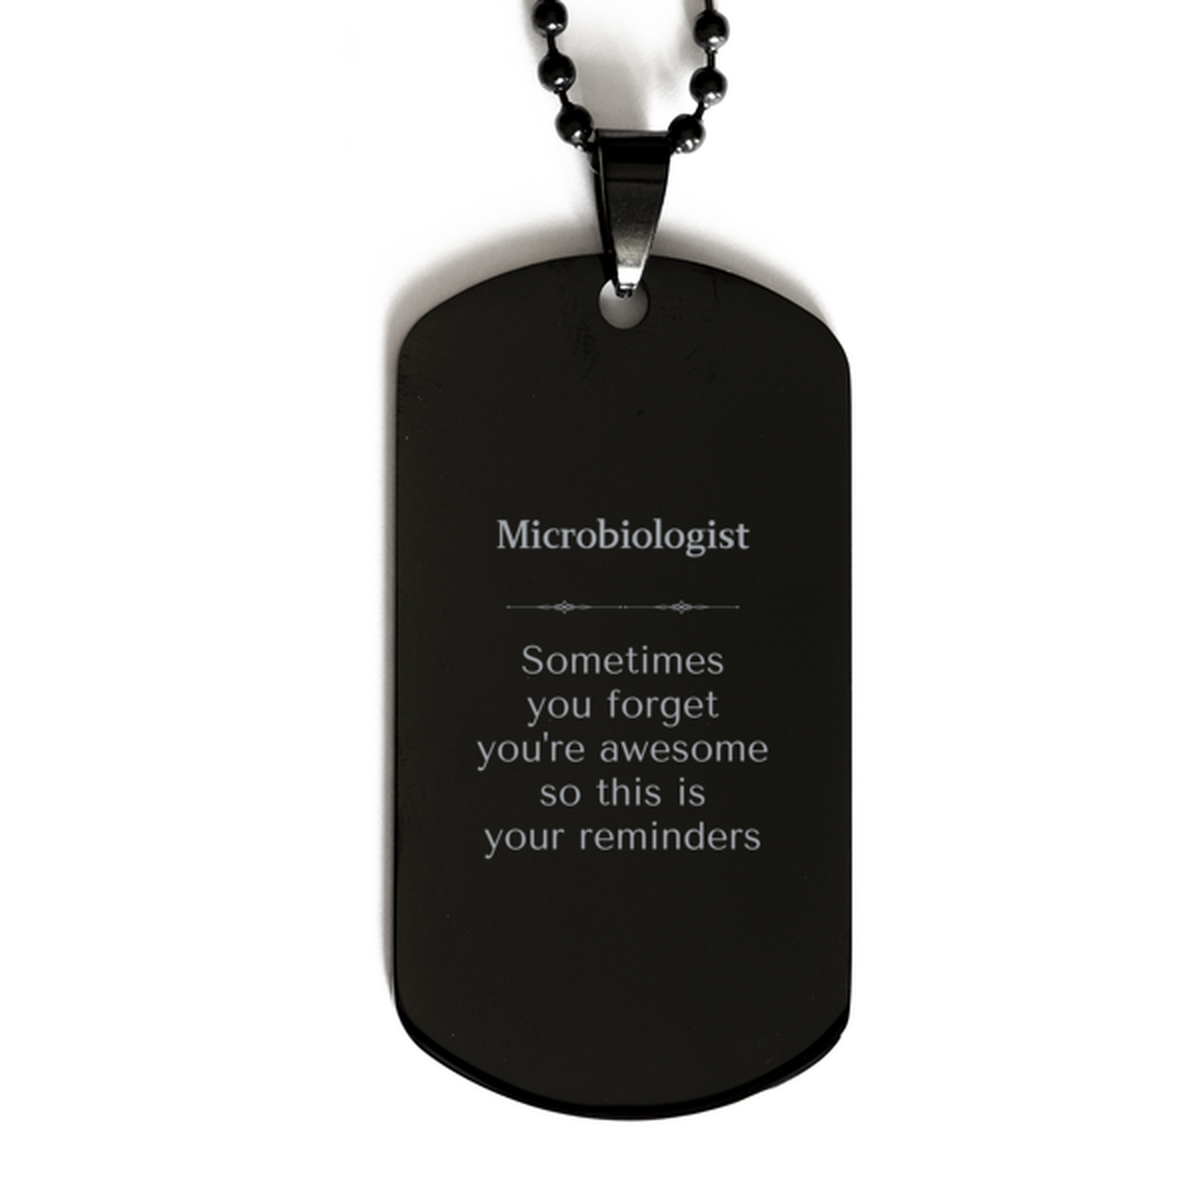 Sentimental Microbiologist Black Dog Tag, Microbiologist Sometimes you forget you're awesome so this is your reminders, Graduation Christmas Birthday Gifts for Microbiologist, Men, Women, Coworkers